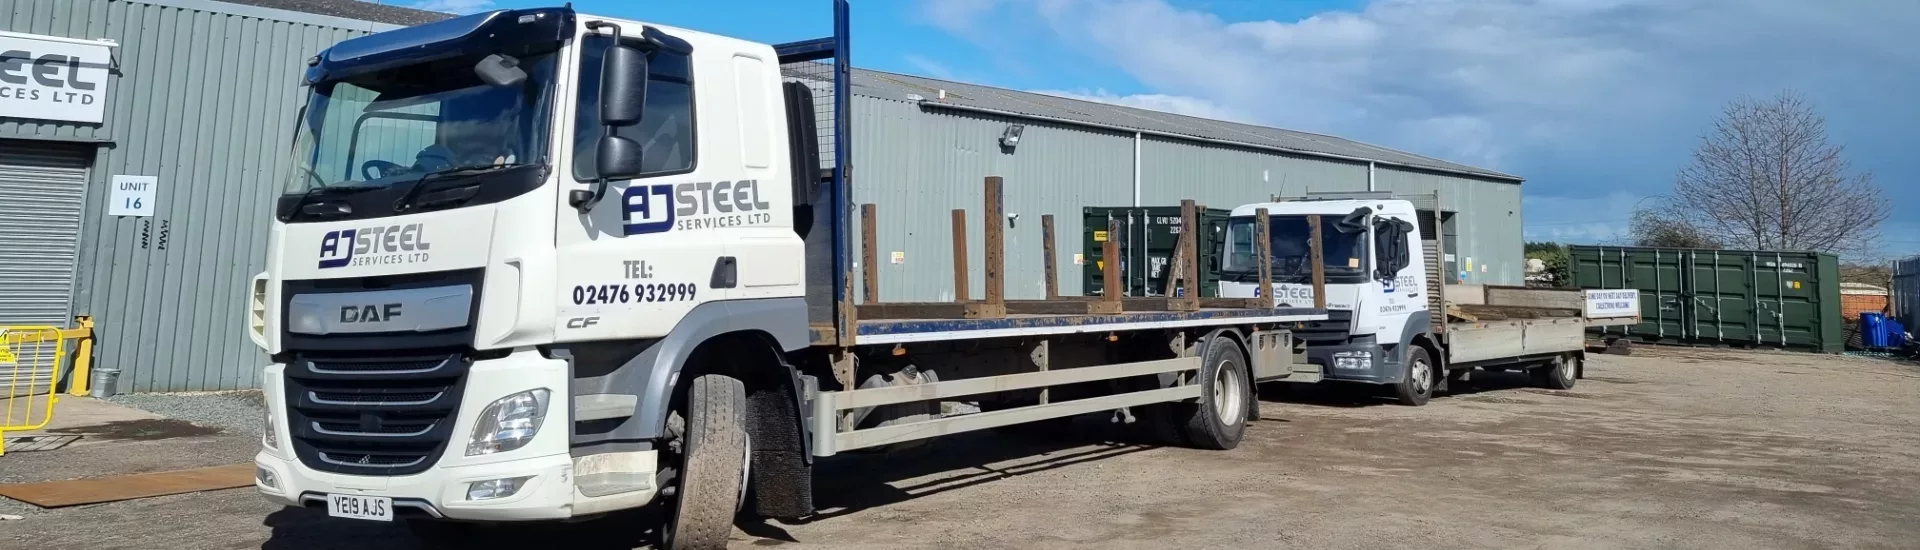 AJ Steel Delivery